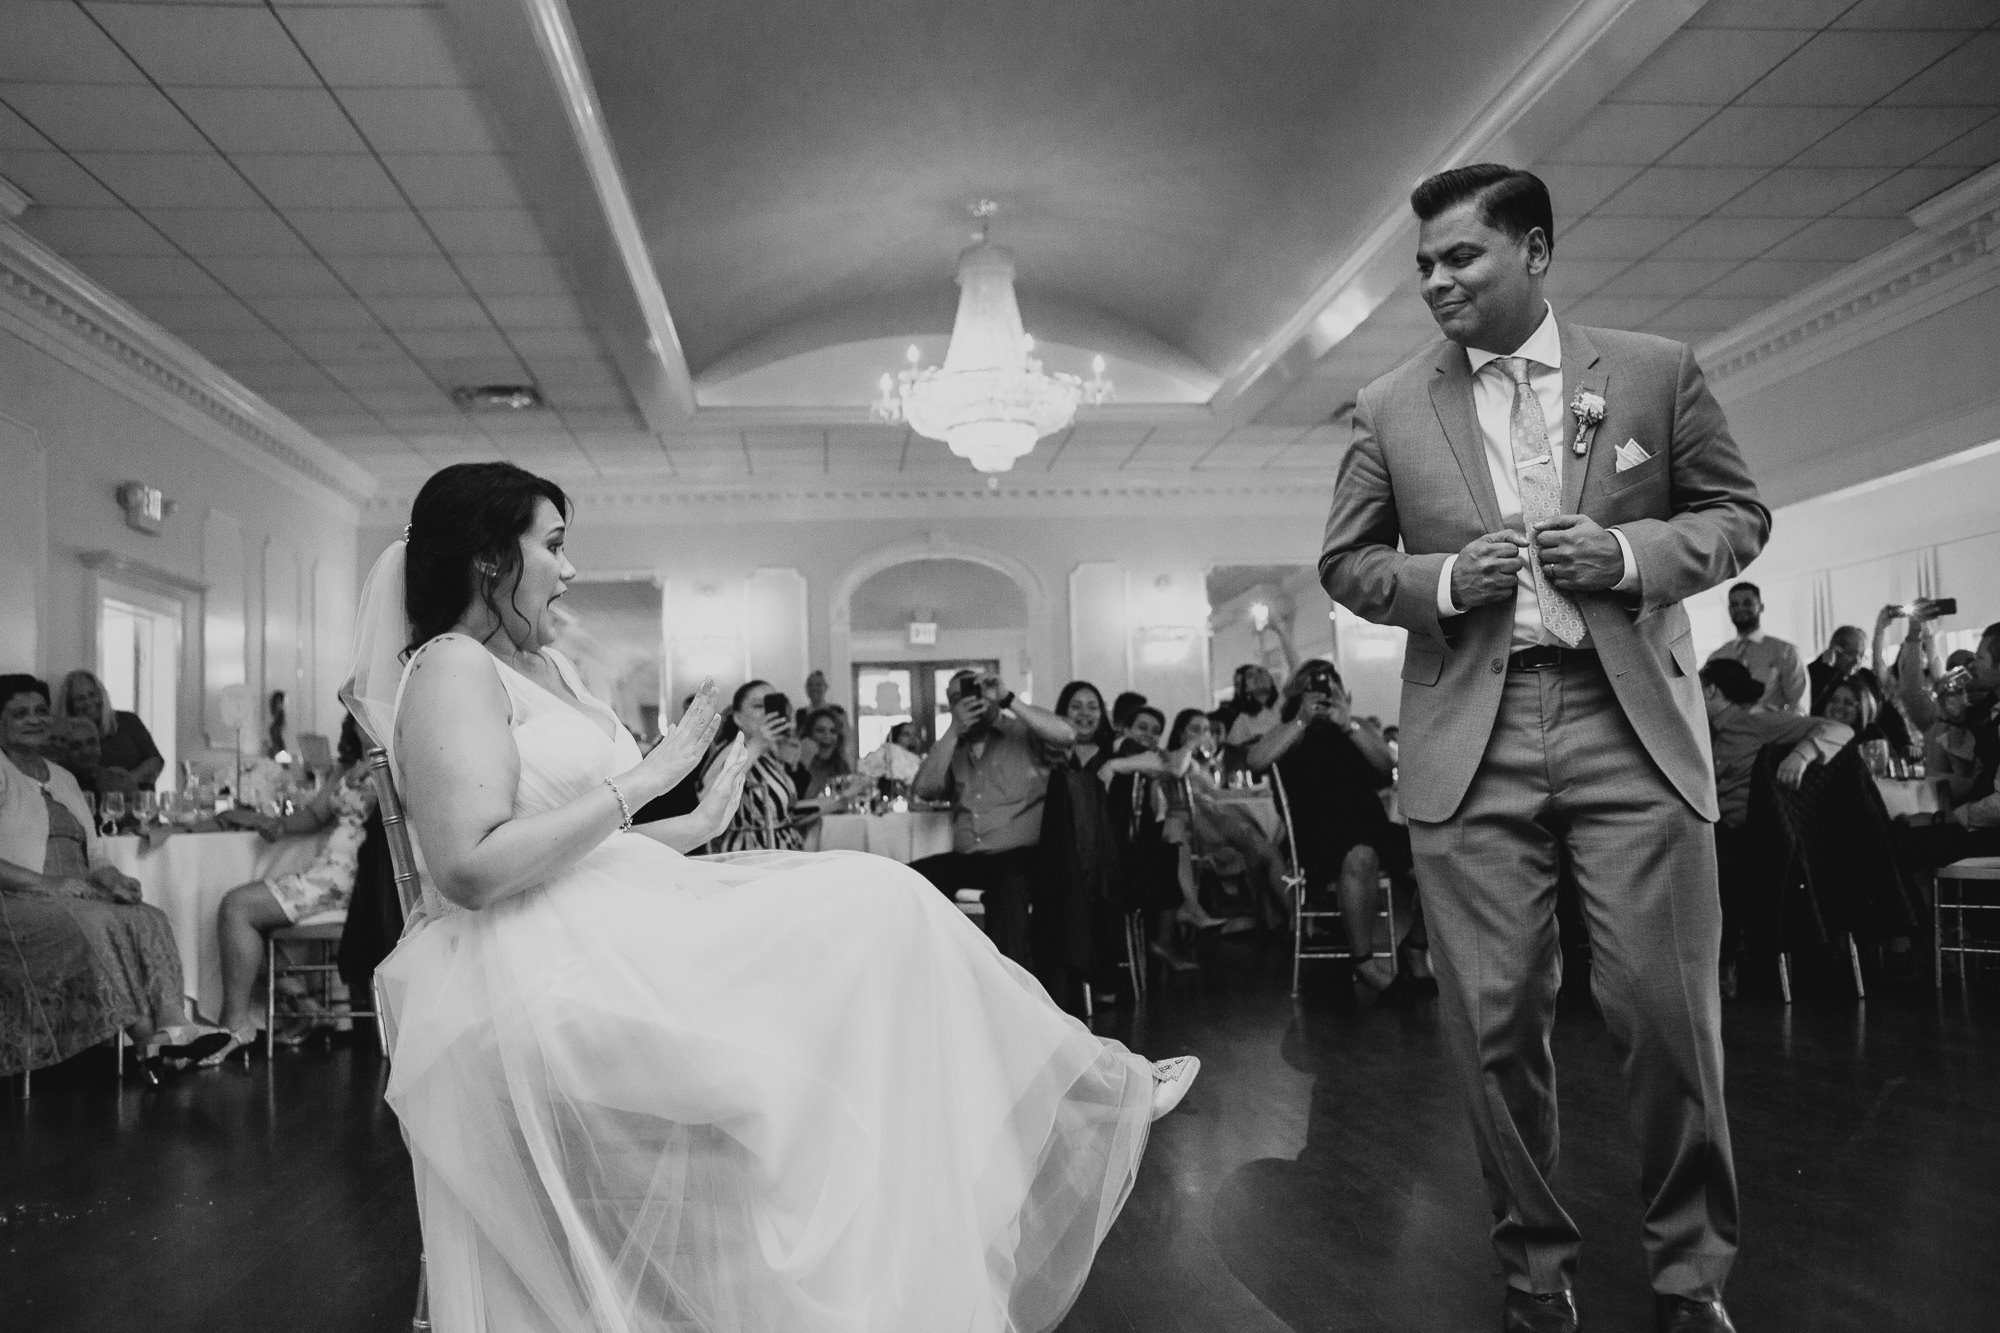 a bride and groom dance together during their wedding reception at a country club in long island, ny